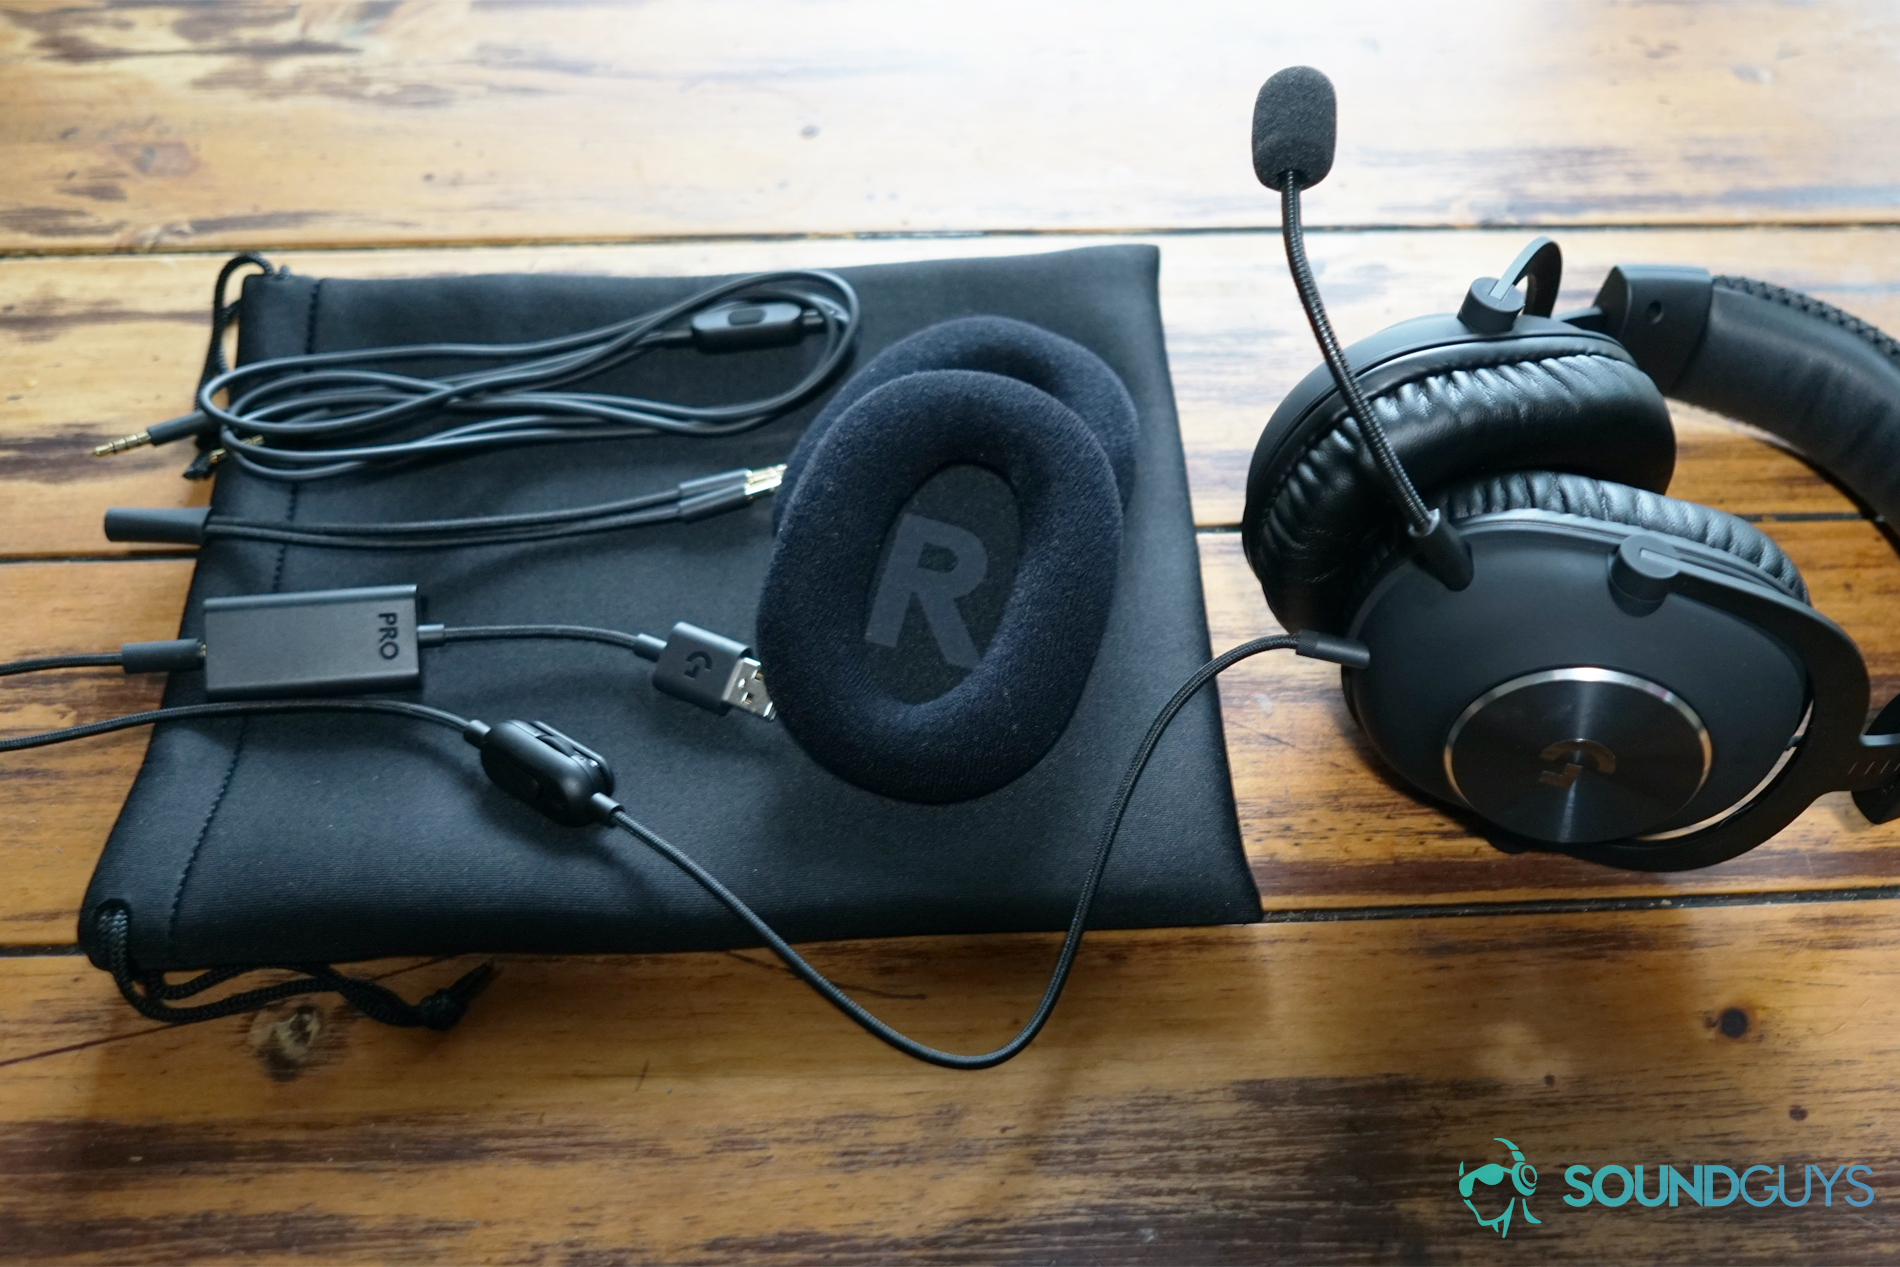 The Logitech G Pro X sits on a table next too all the different attachments it comes with.